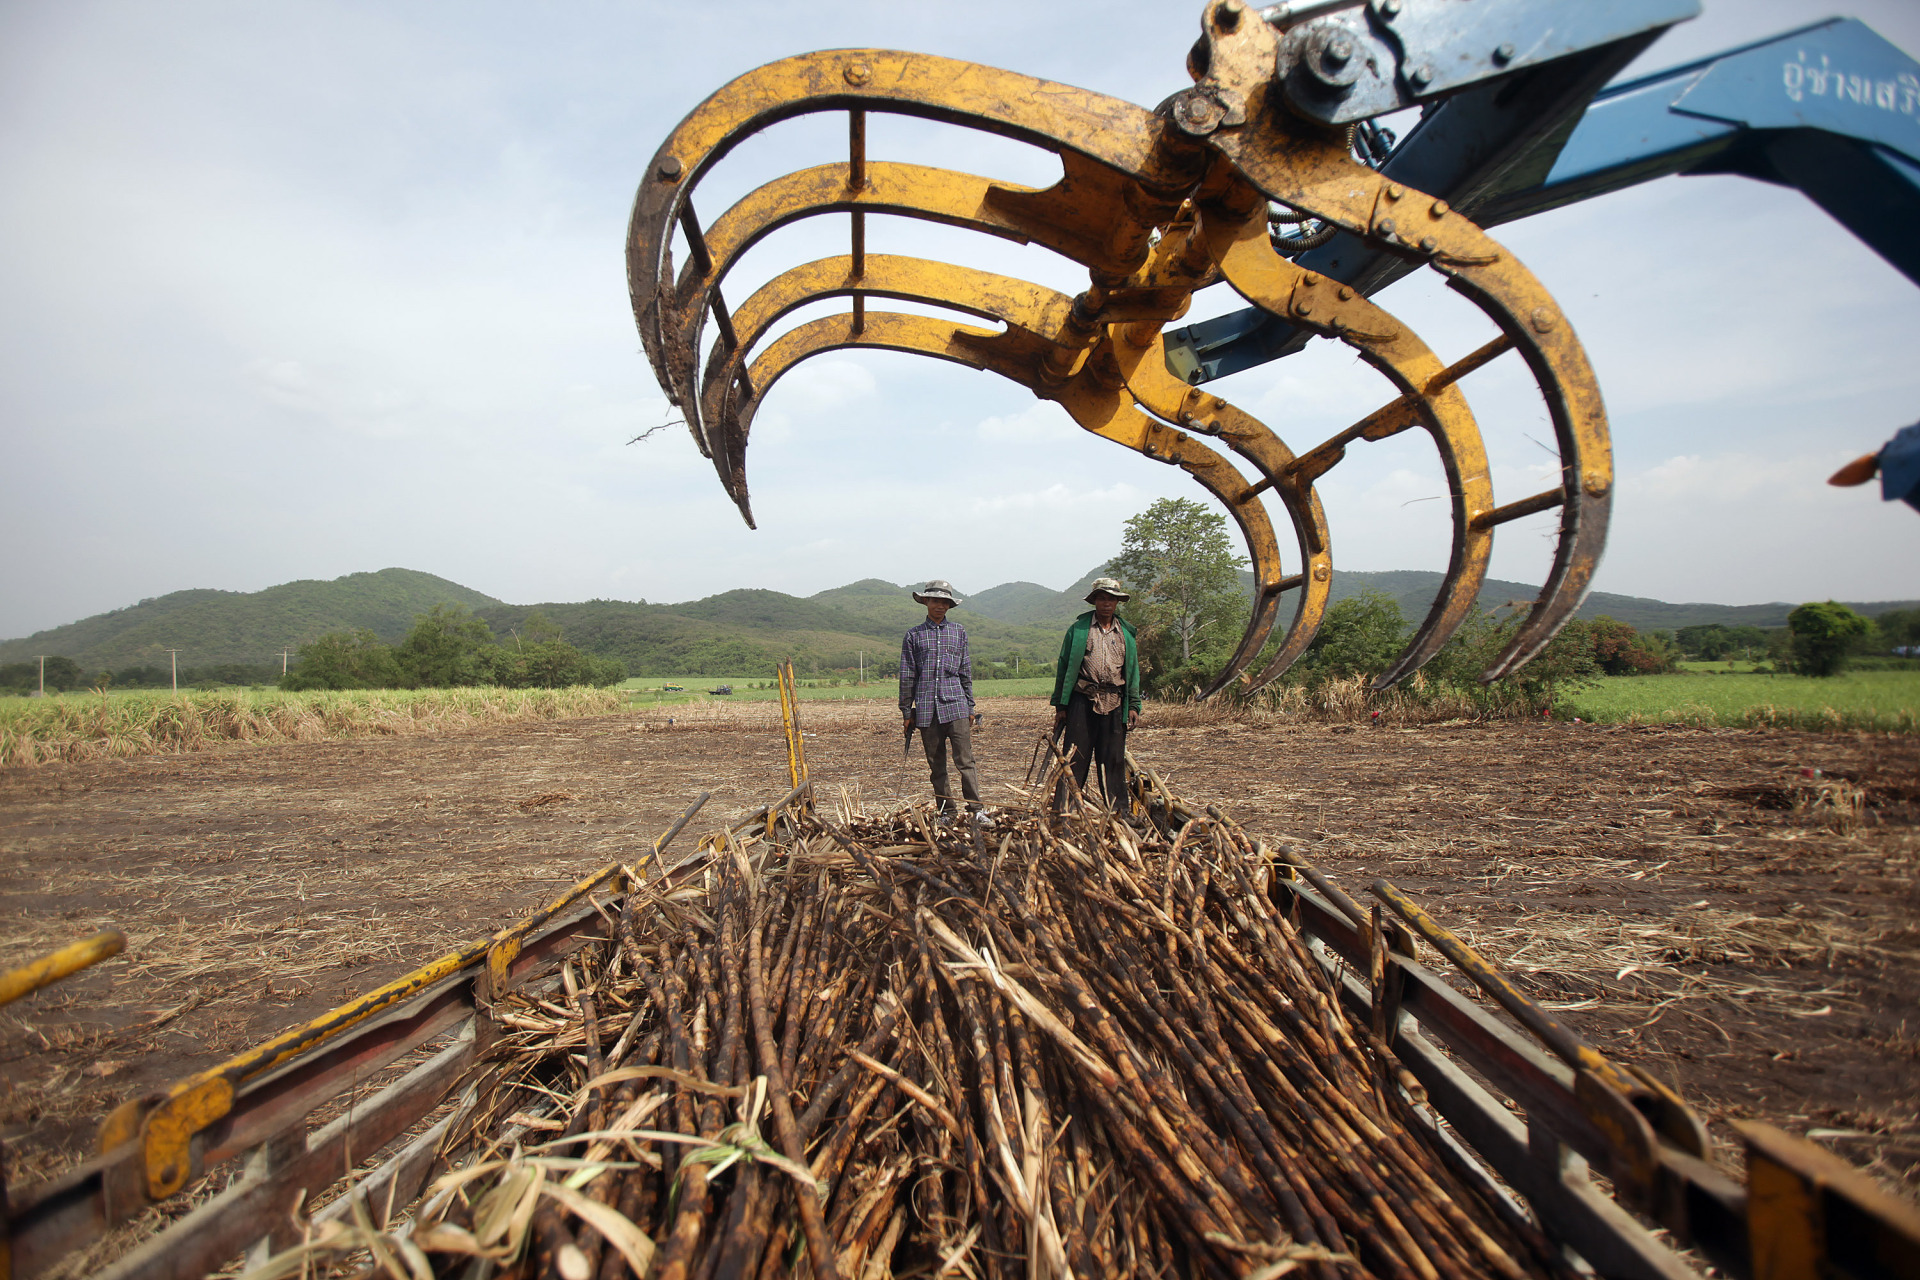 Workers load harvested sugar cane onto a truck in Saraburi province, north of Bangkok, Thailand.